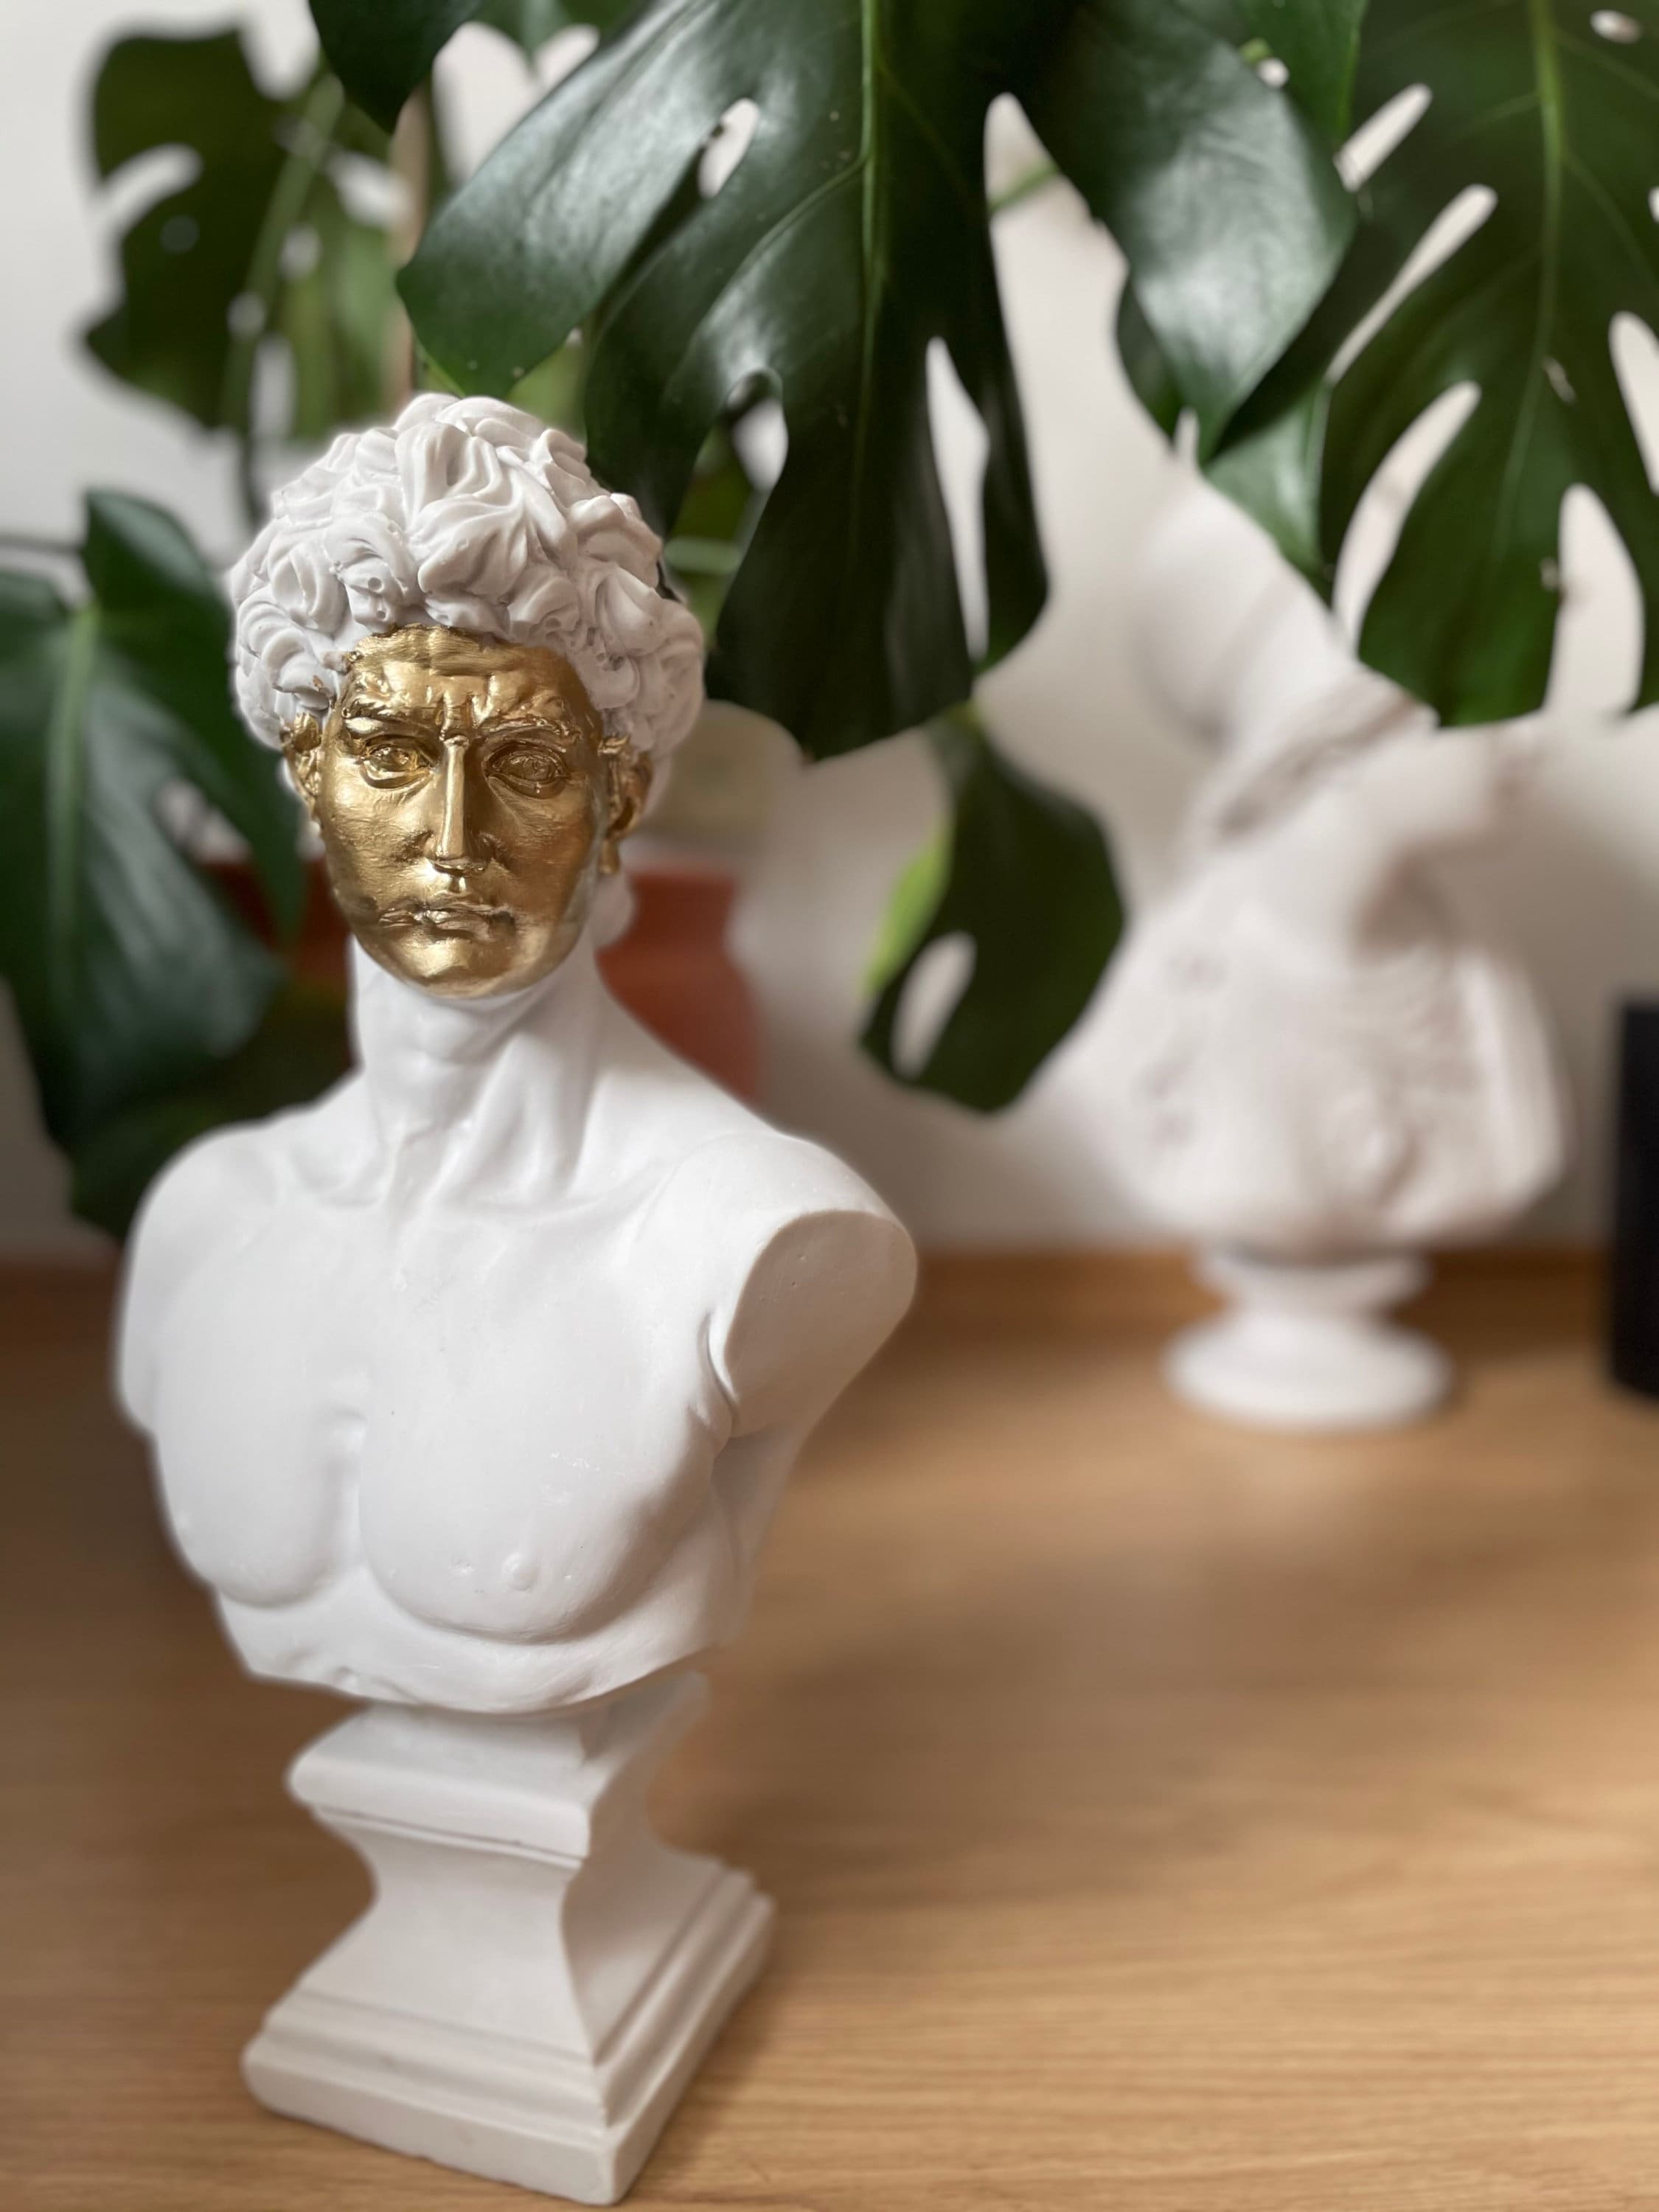 Gilded Classic: Large David Bust Sculpture with Gold Face